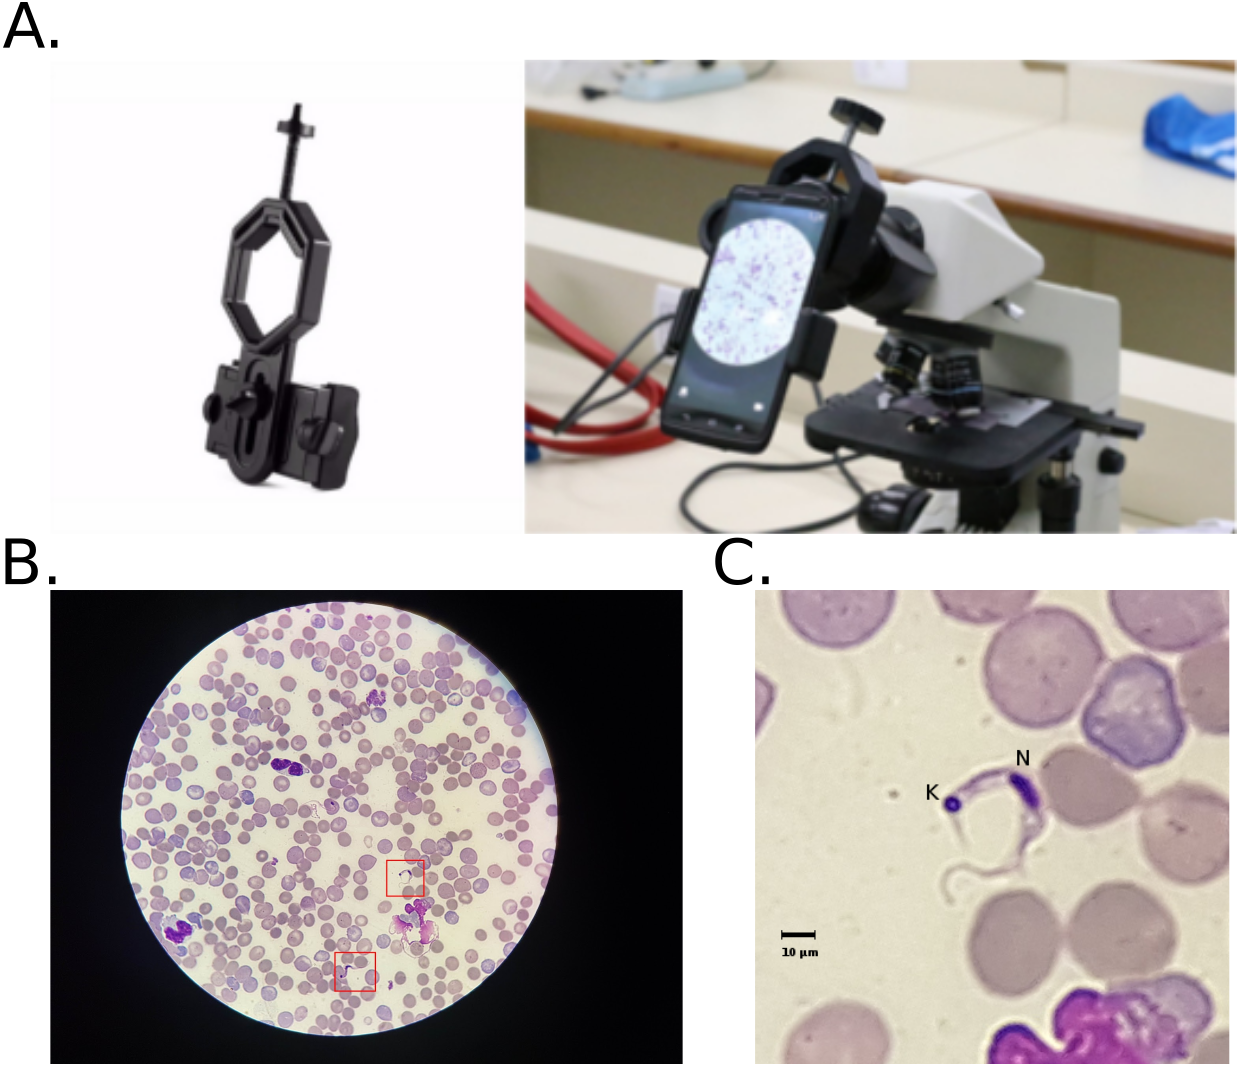 Automatic detection of the parasite Trypanosoma cruzi in blood